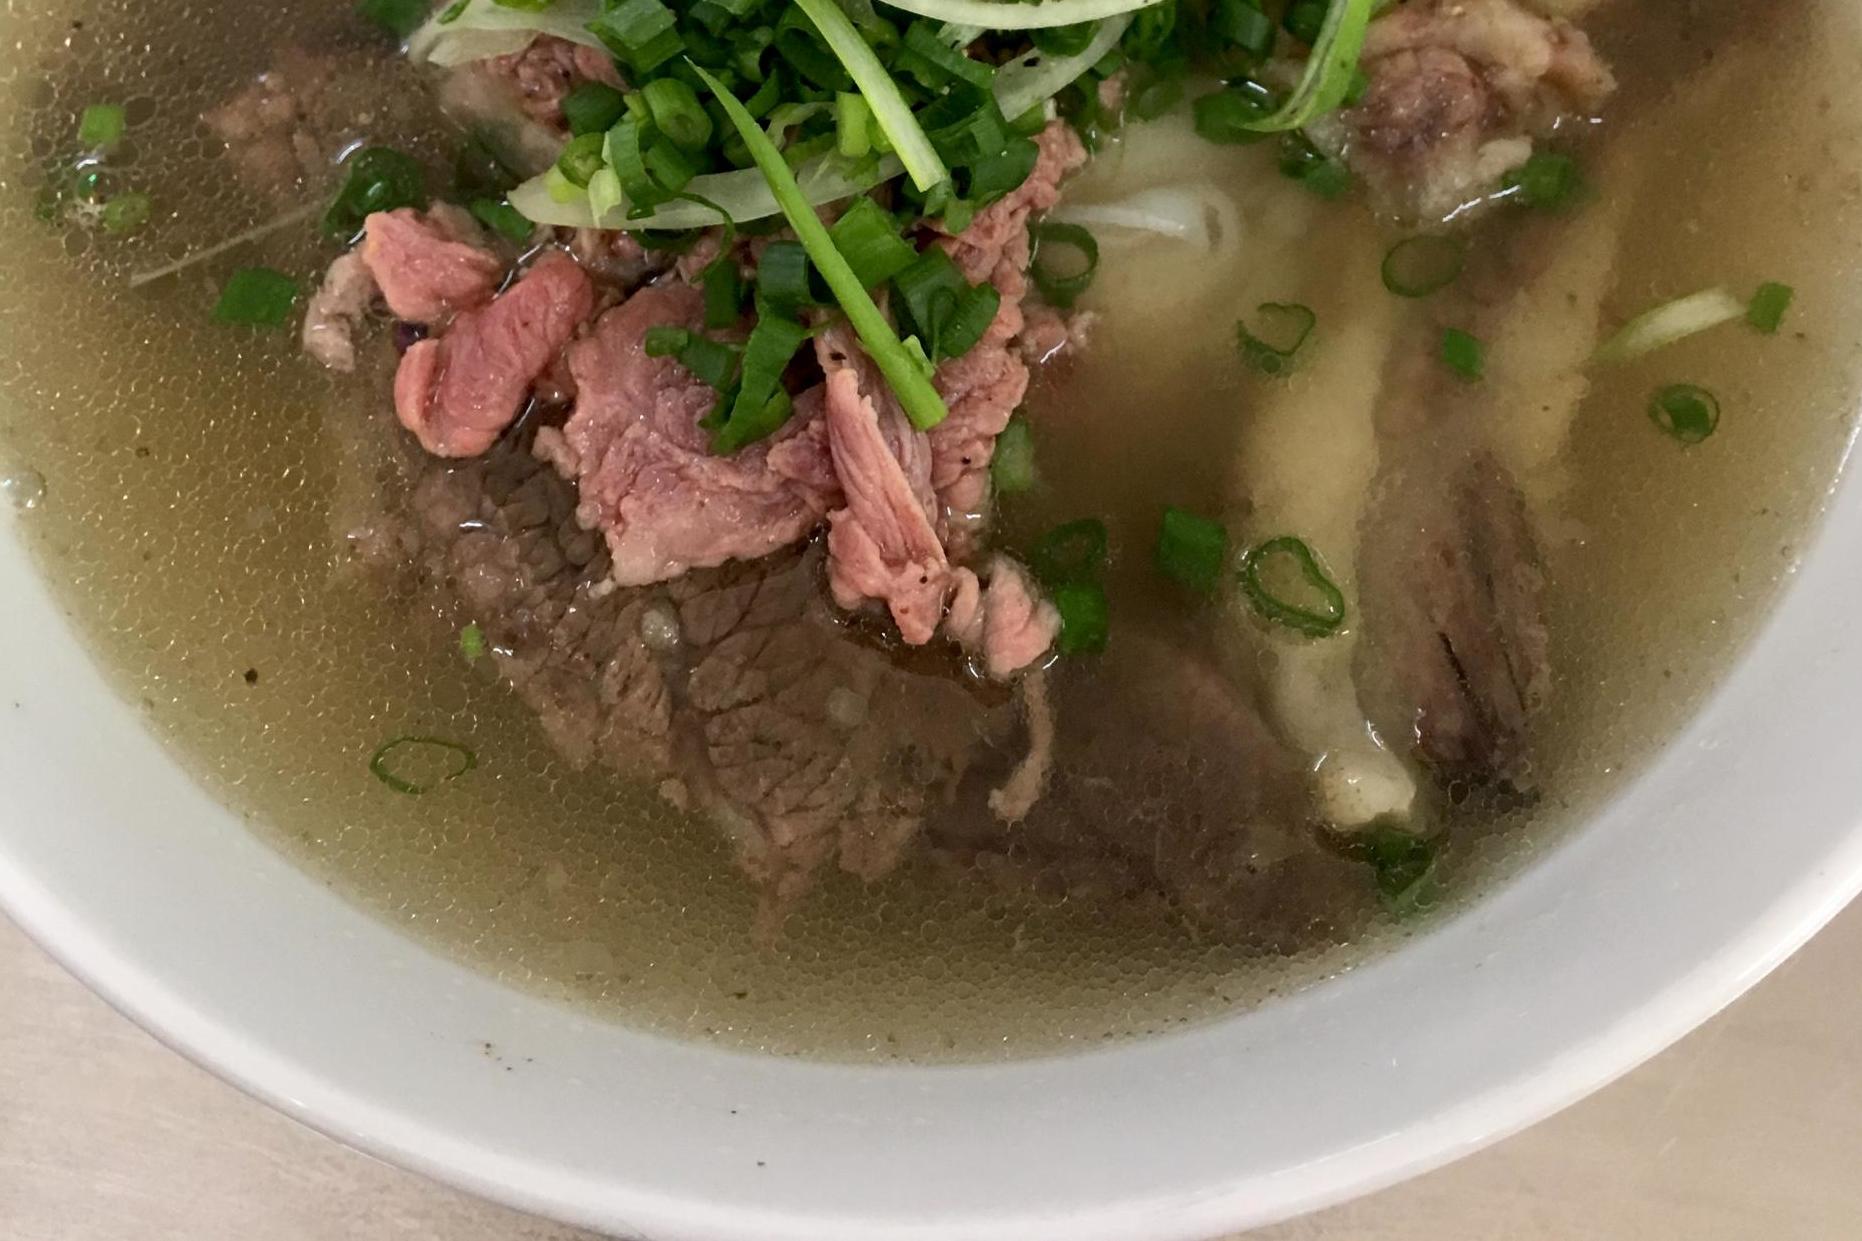 Pho is beef noodle soup